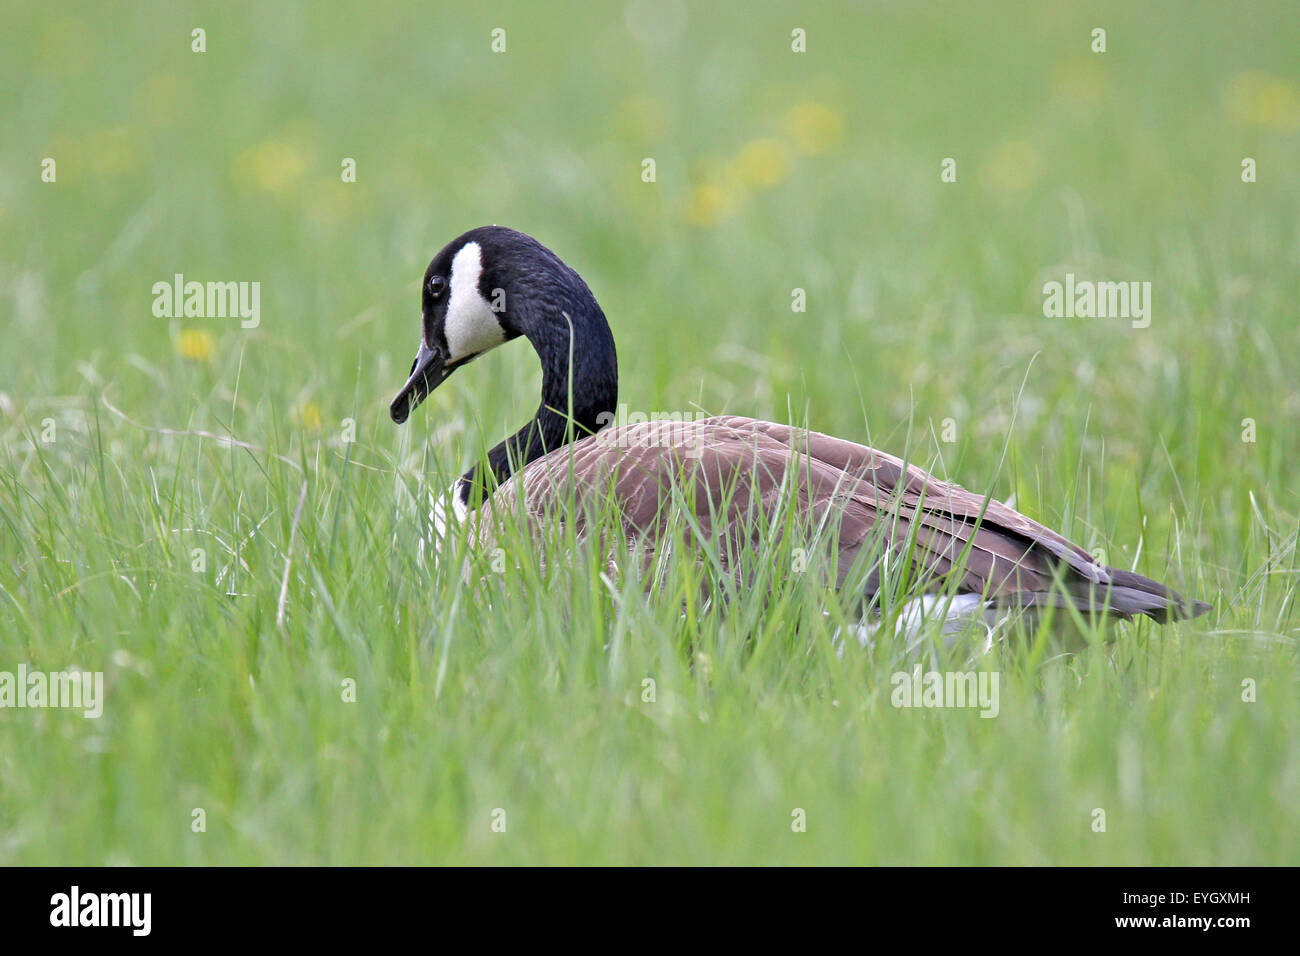 A Canada Goose (Branta canadensis) grazing in a wildflower meadow. Stock Photo